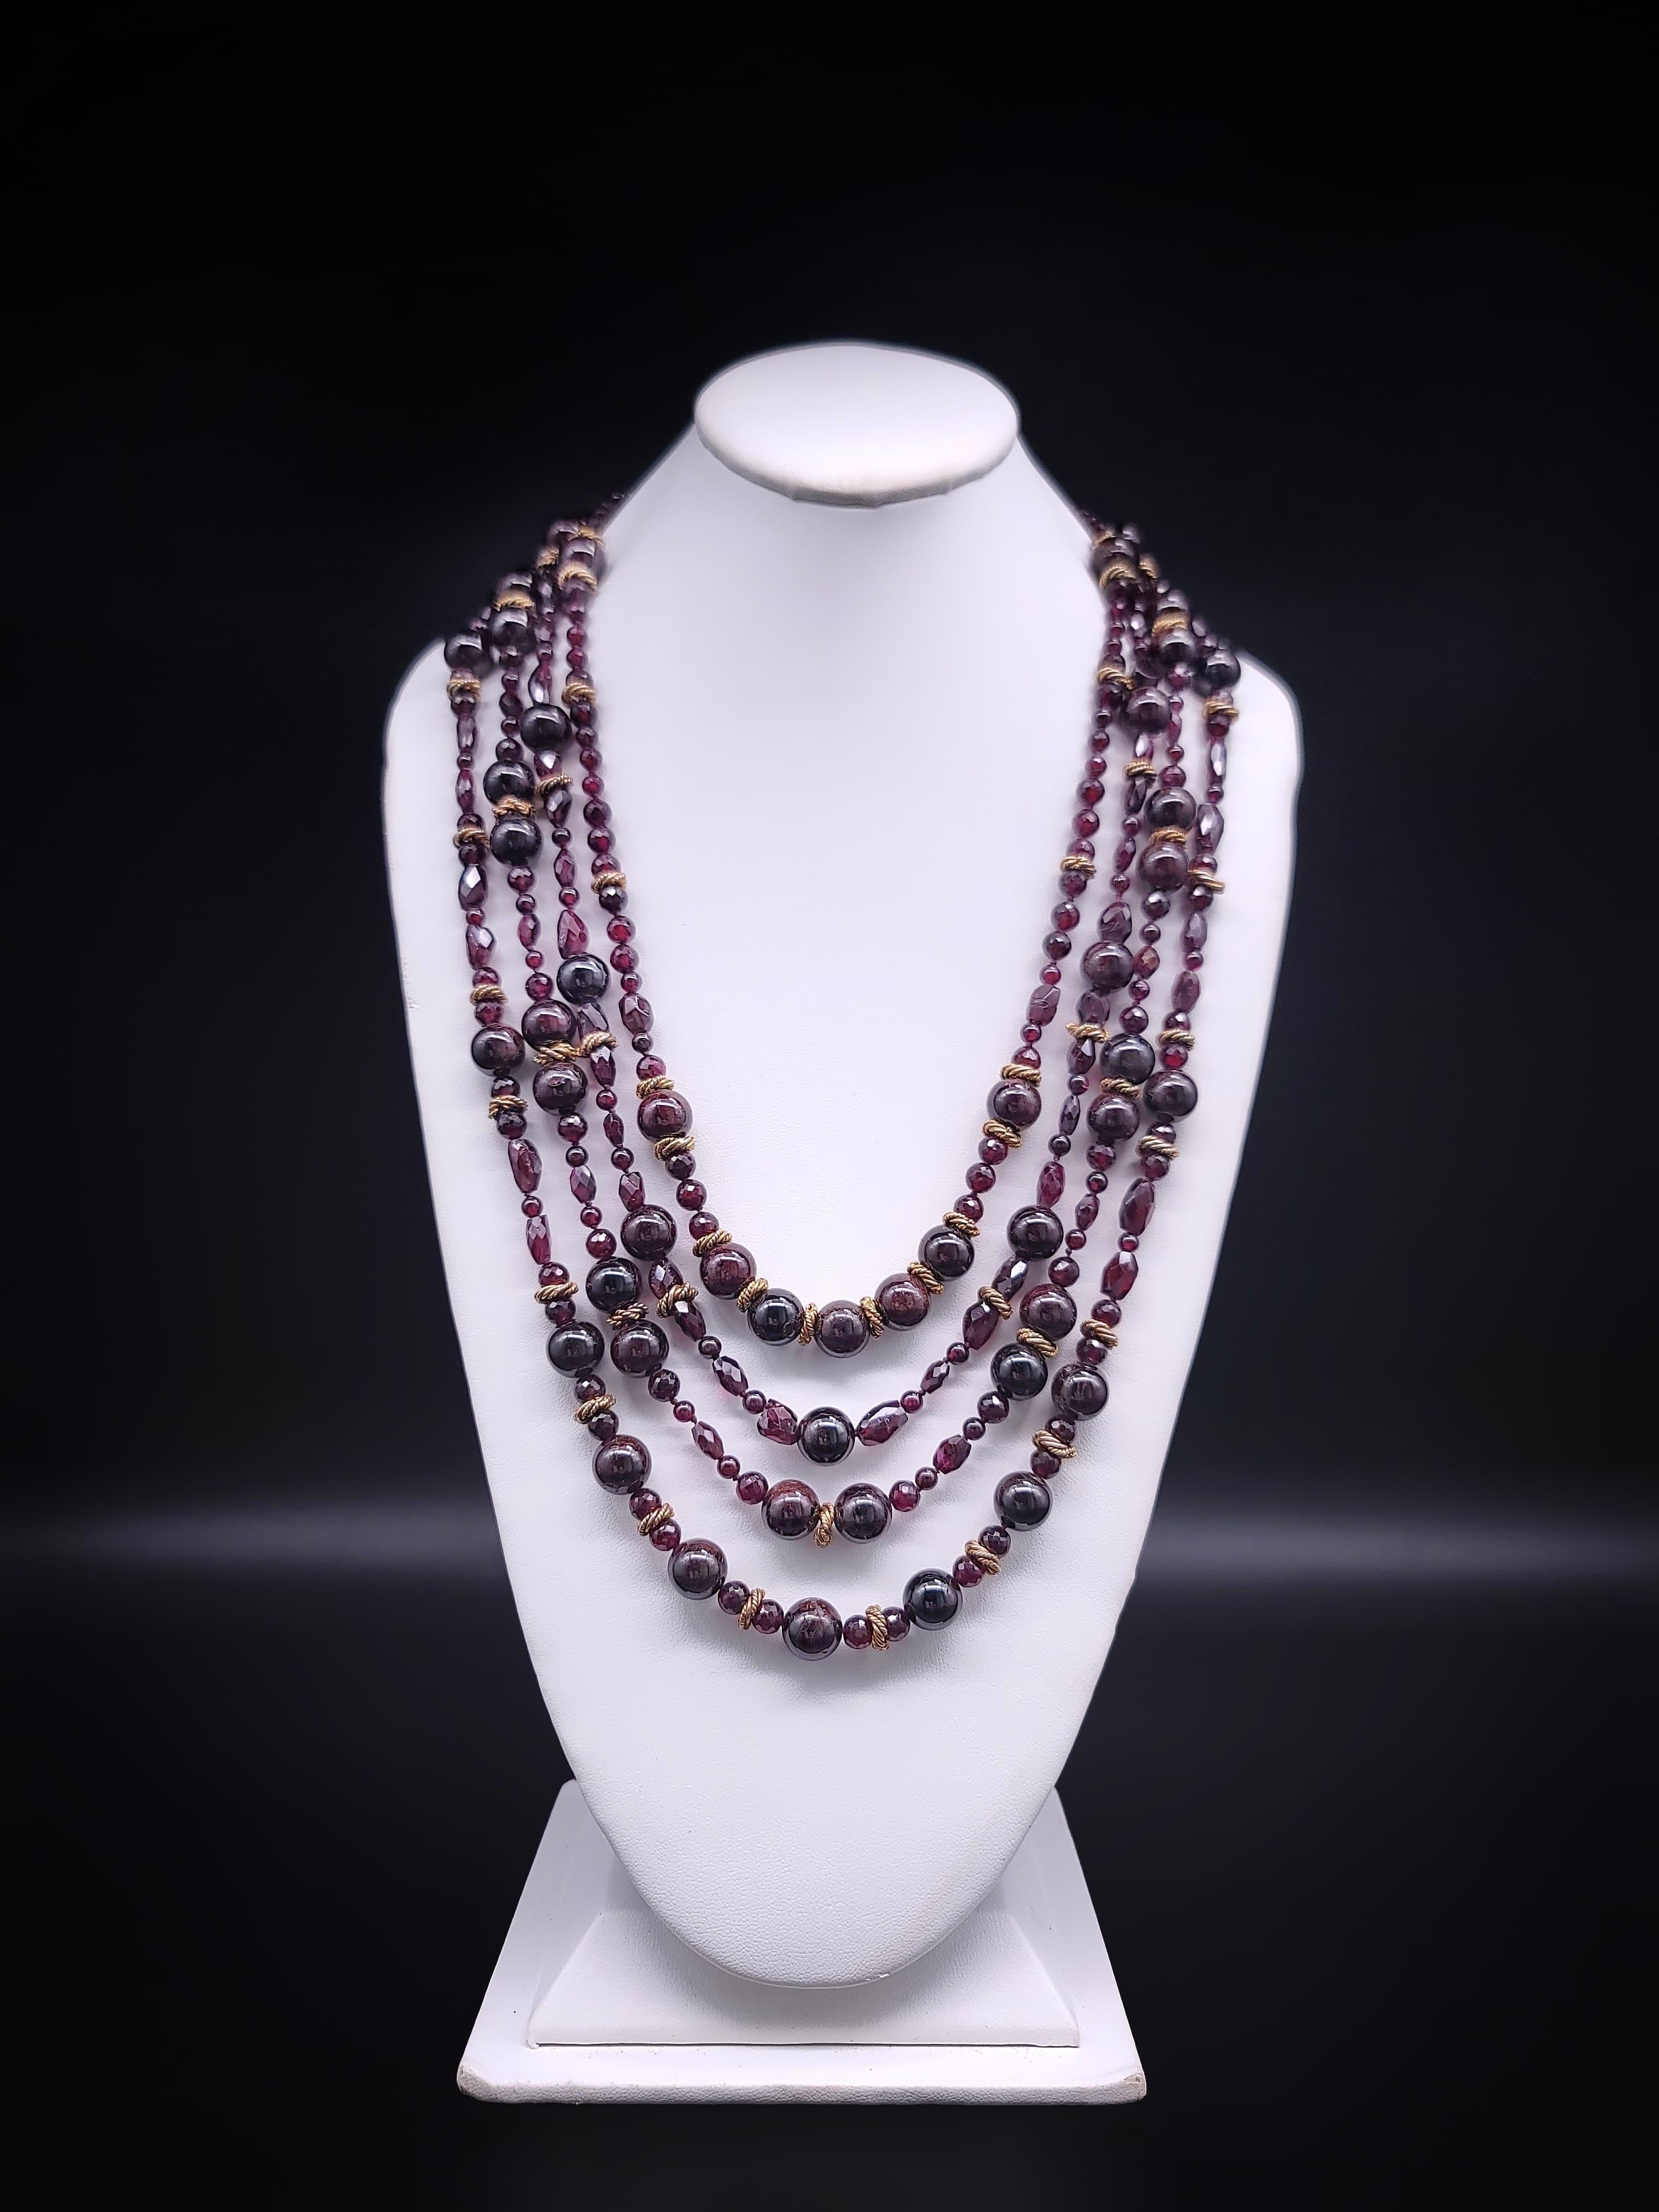 A.Jeschel 4- strands of richly colored Garnet and vermeil necklace.